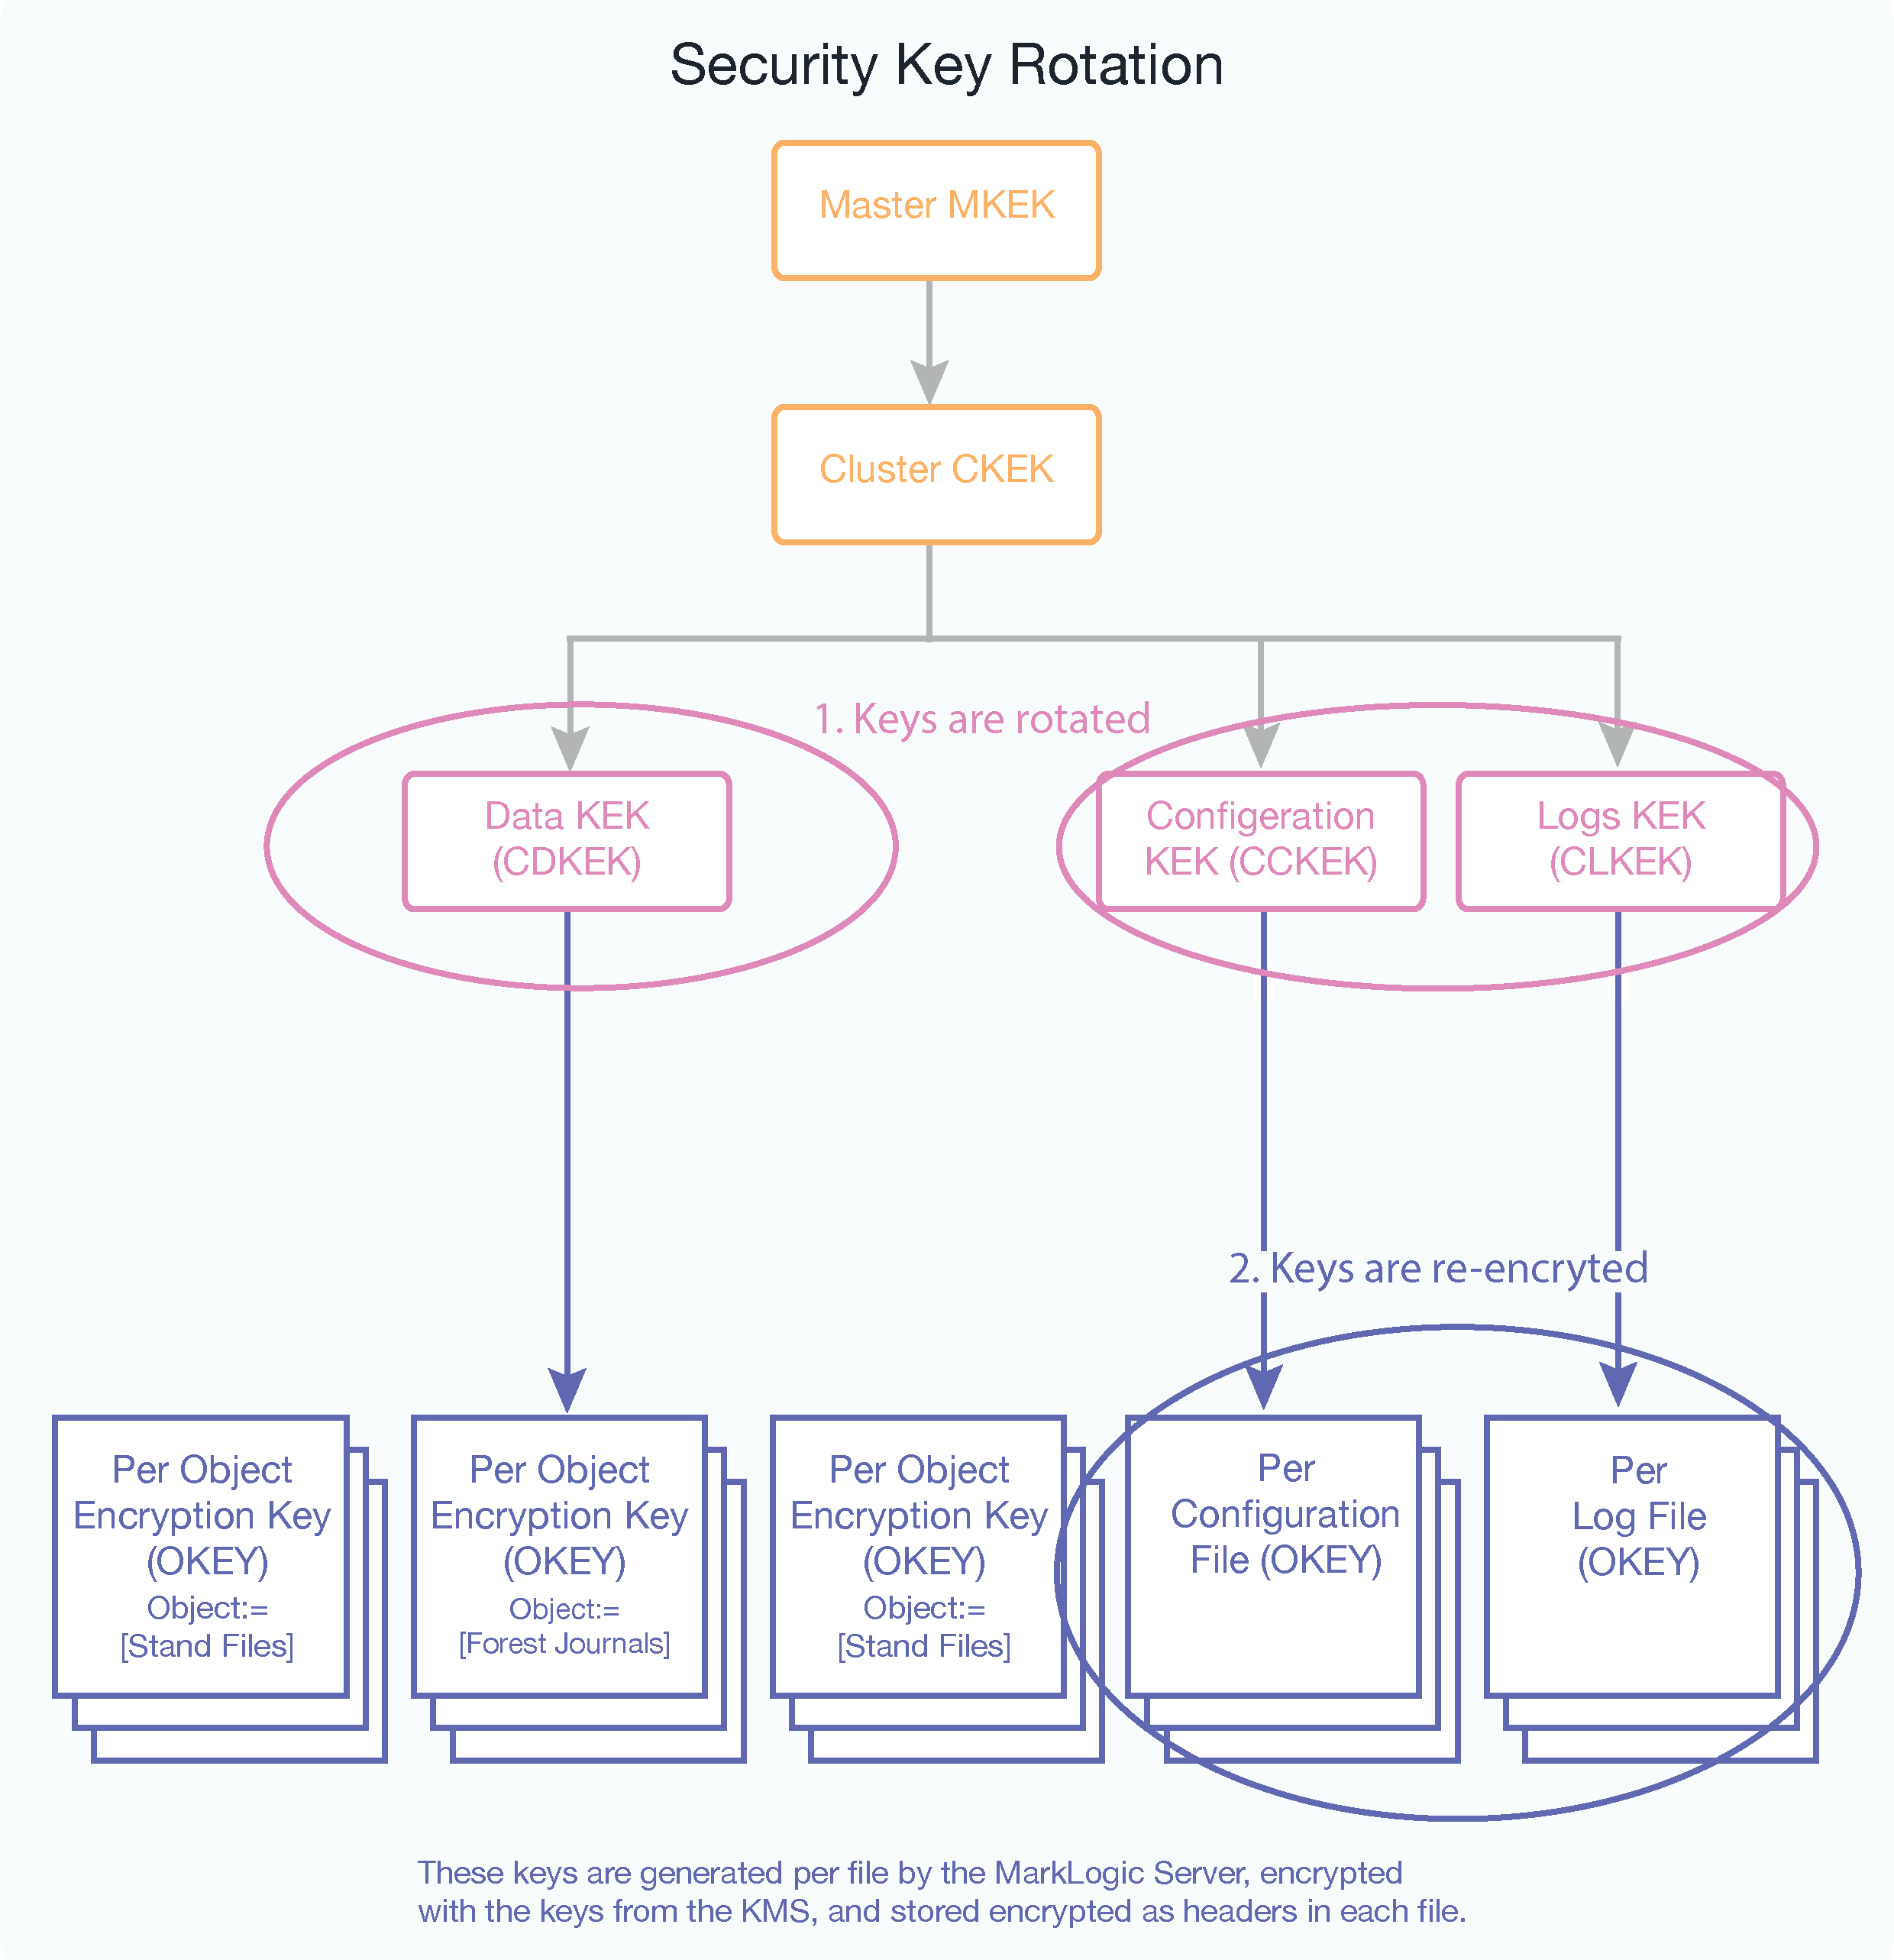 Diagram showing how security keys are rotated